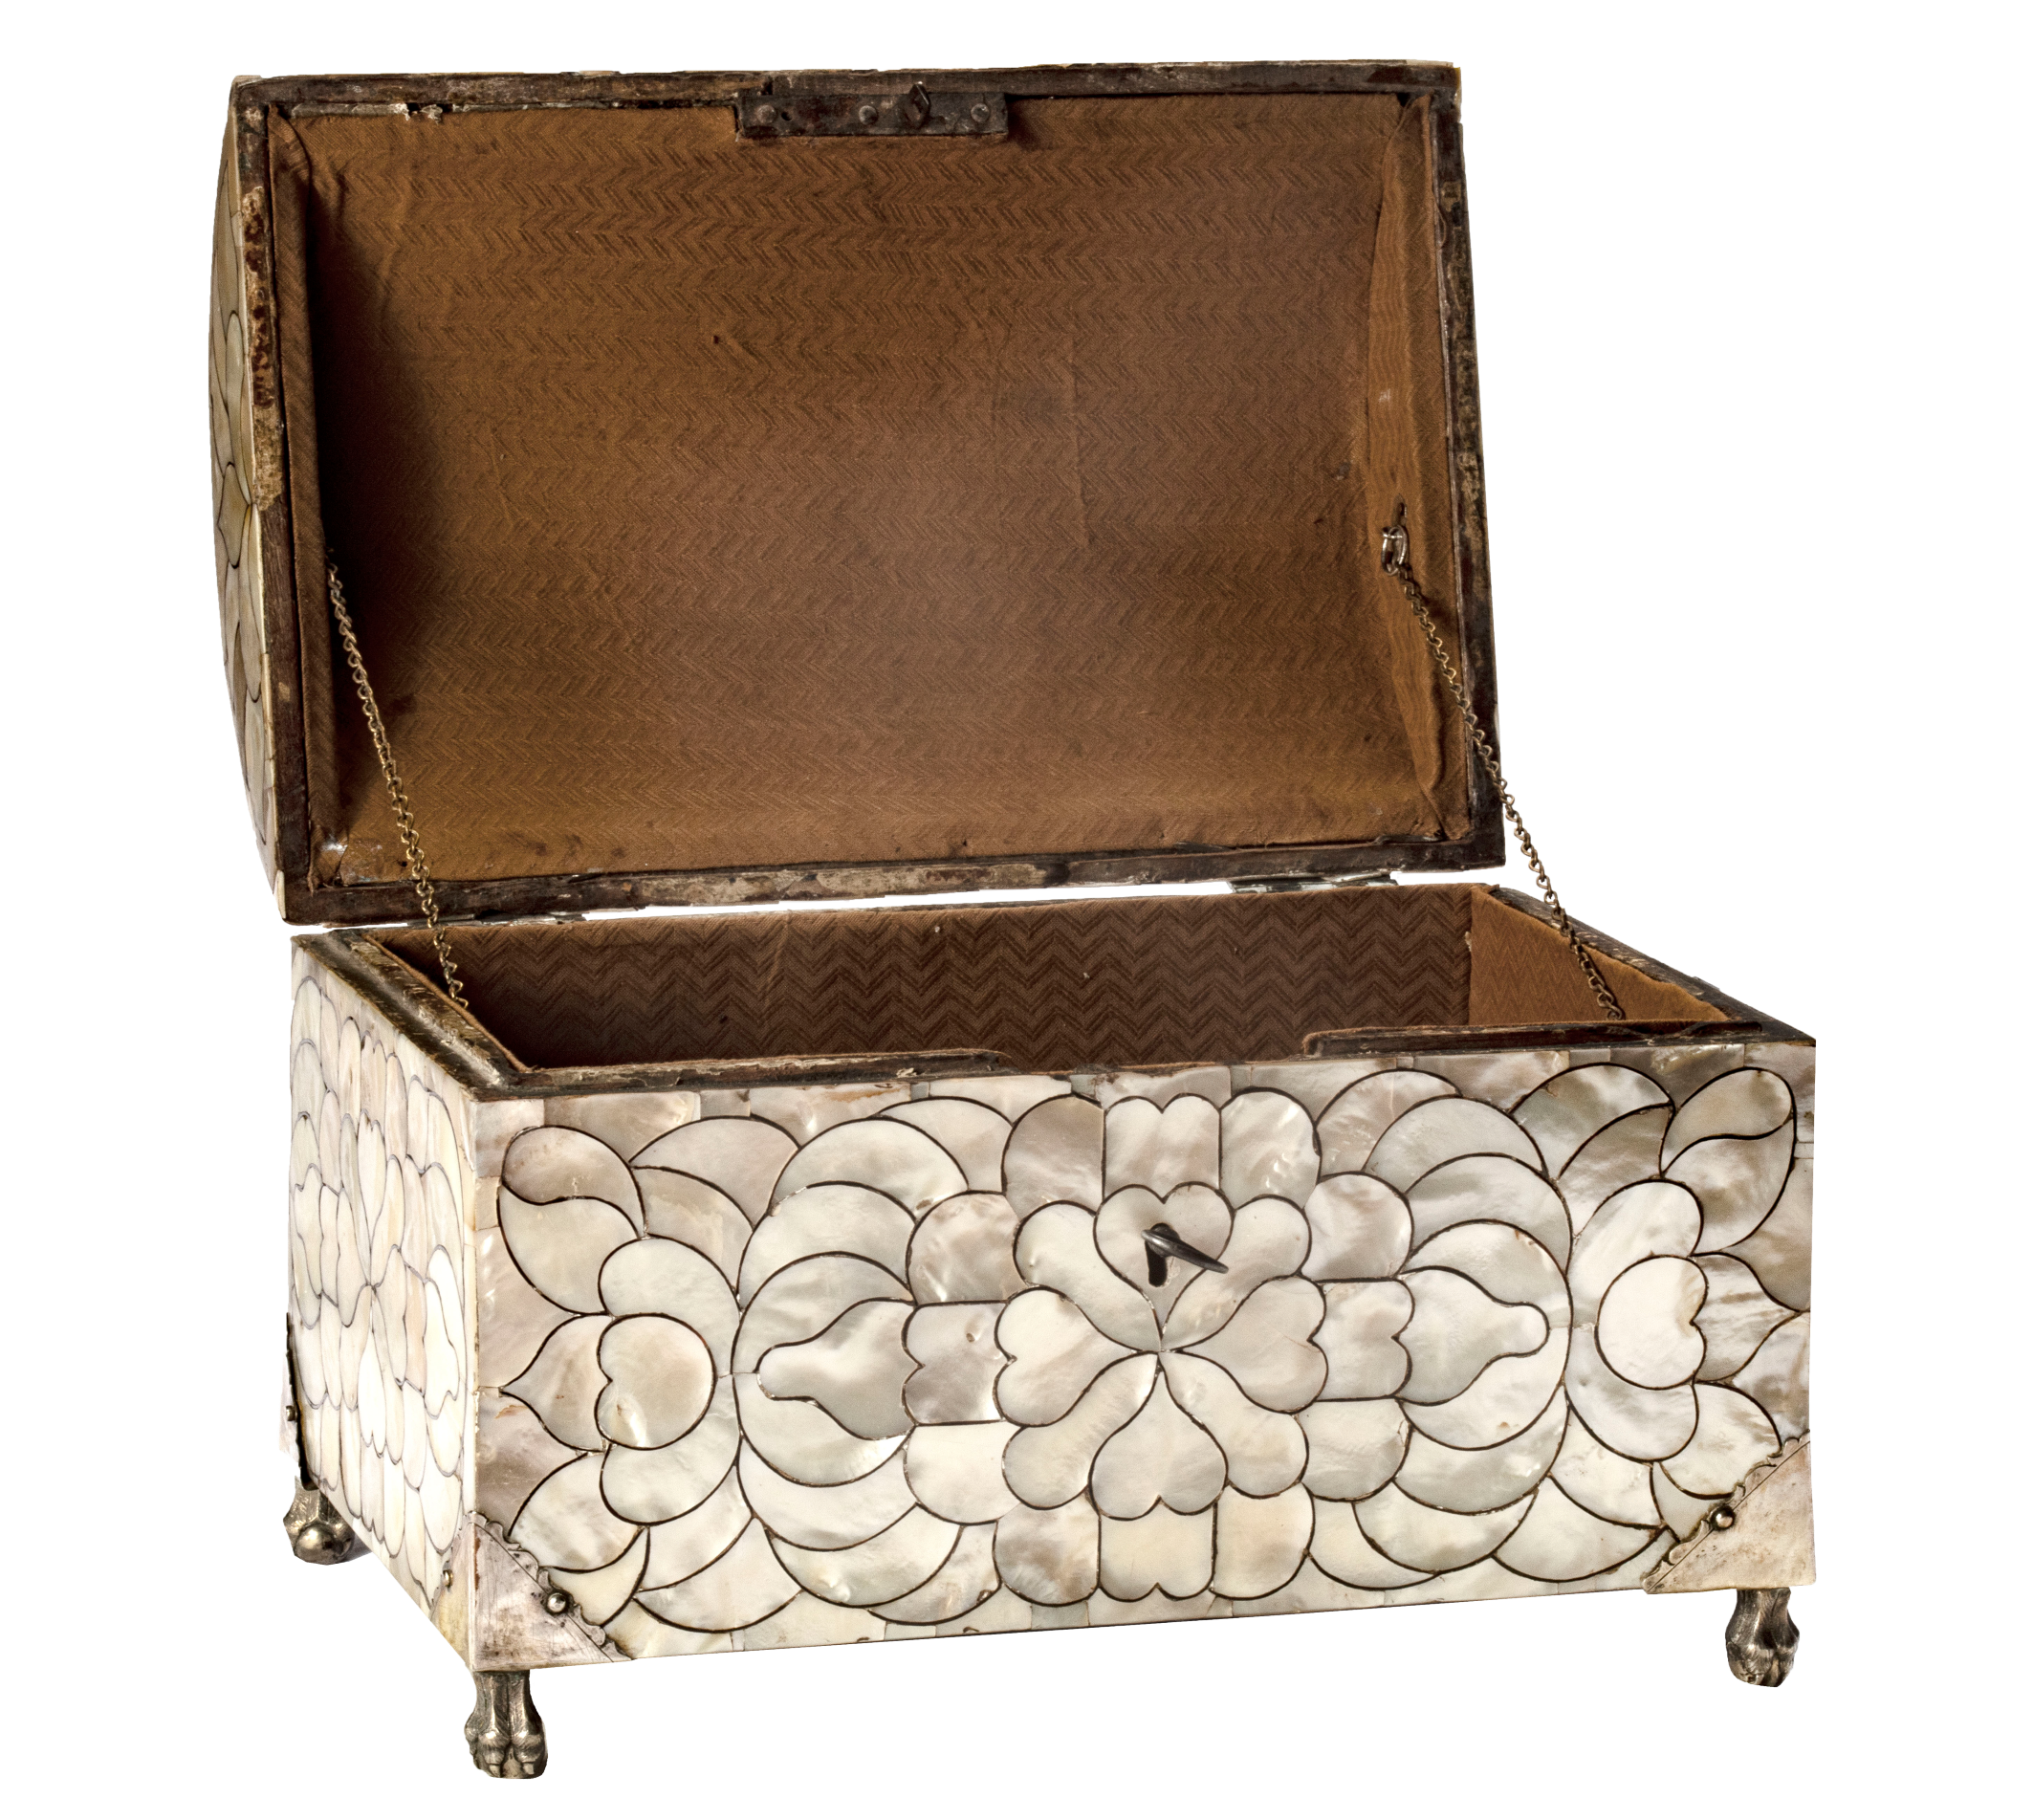 Pro_ Mother of Pearl Casket - open1 - Transparent Cropped.png